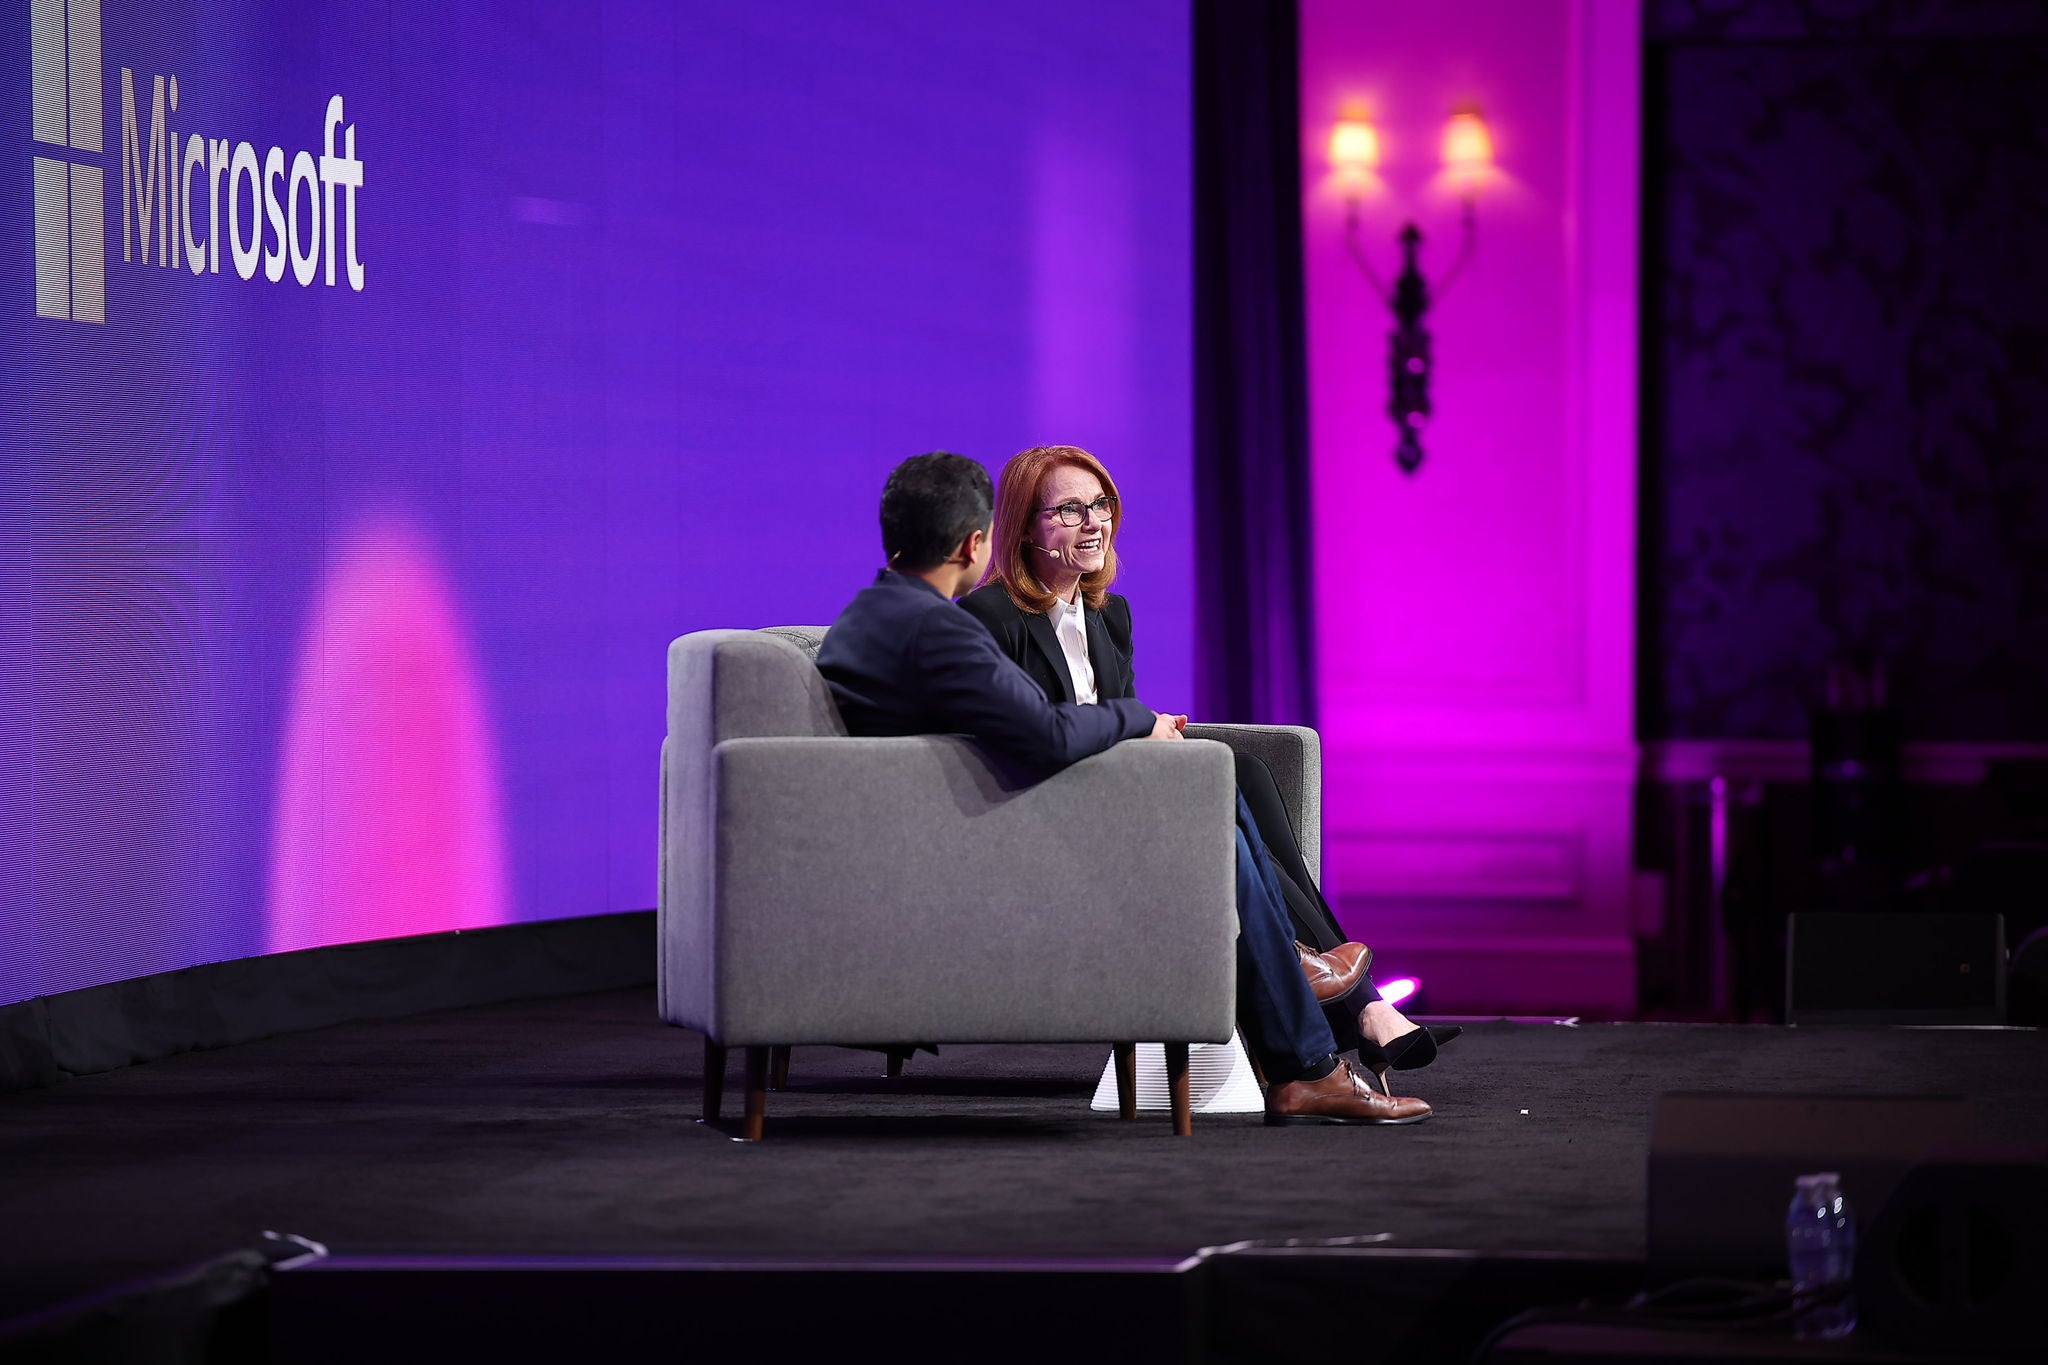 Moveworks CEO Bhavin Shah sat down with Microsoft's Vice President of Enterprise Sales Katy Brown for an engaging fireside chat.